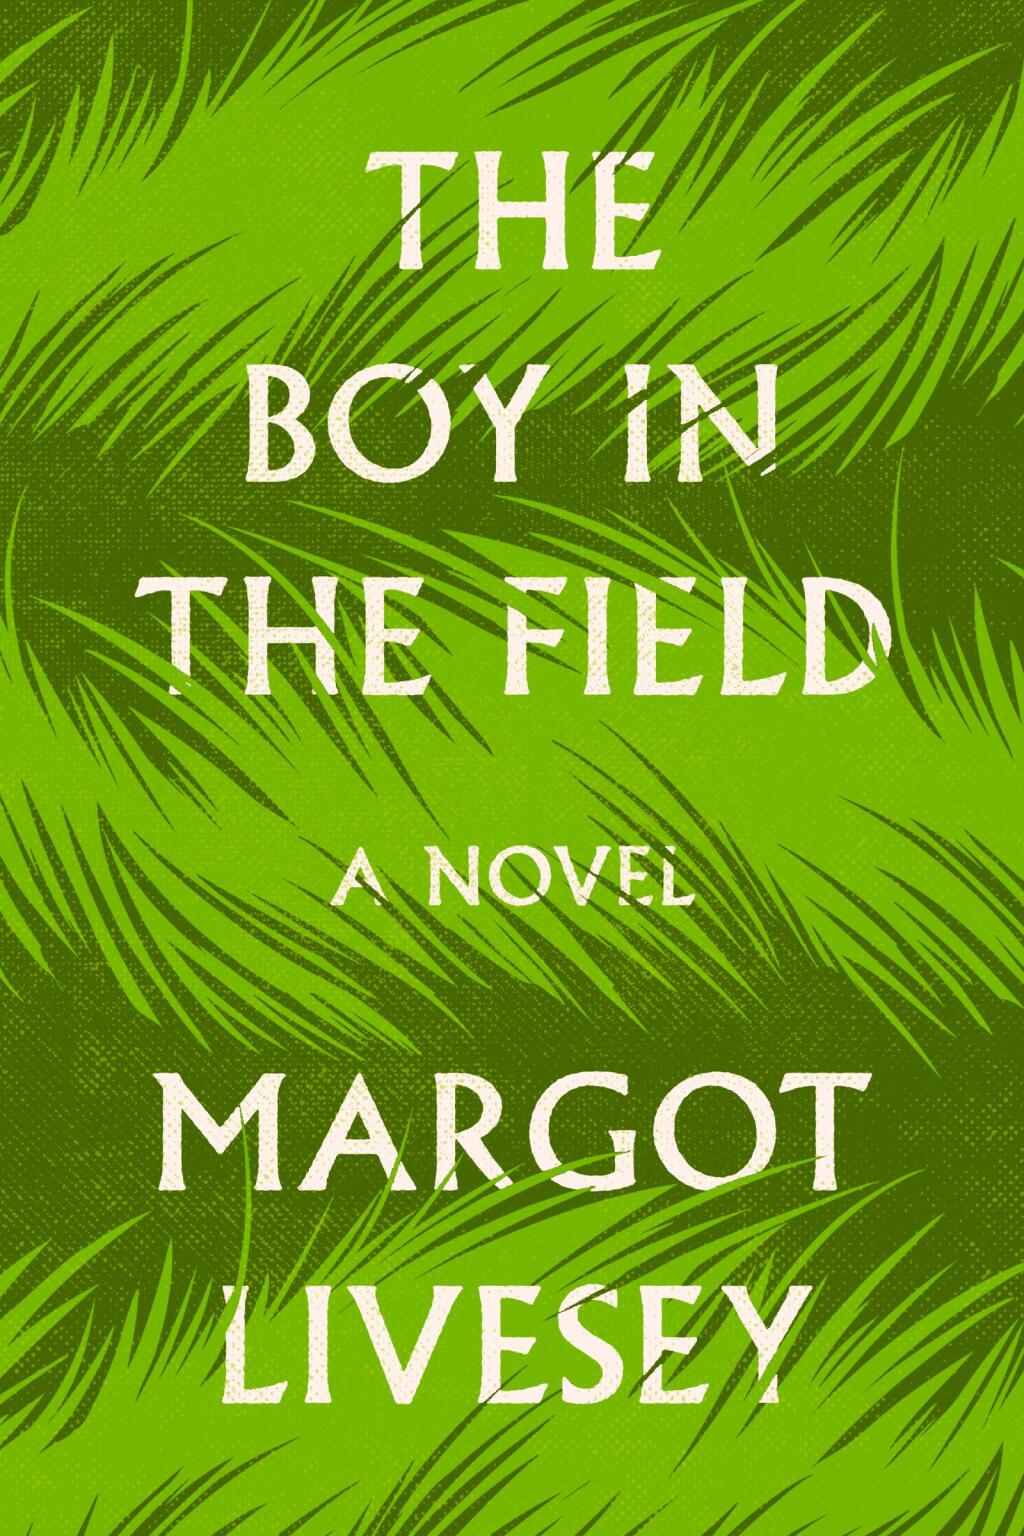 Margot Livesey’s “The Boy in the Field” is the No. 1 bestselling book in Petaluma this week. (HARPER BOOKS)